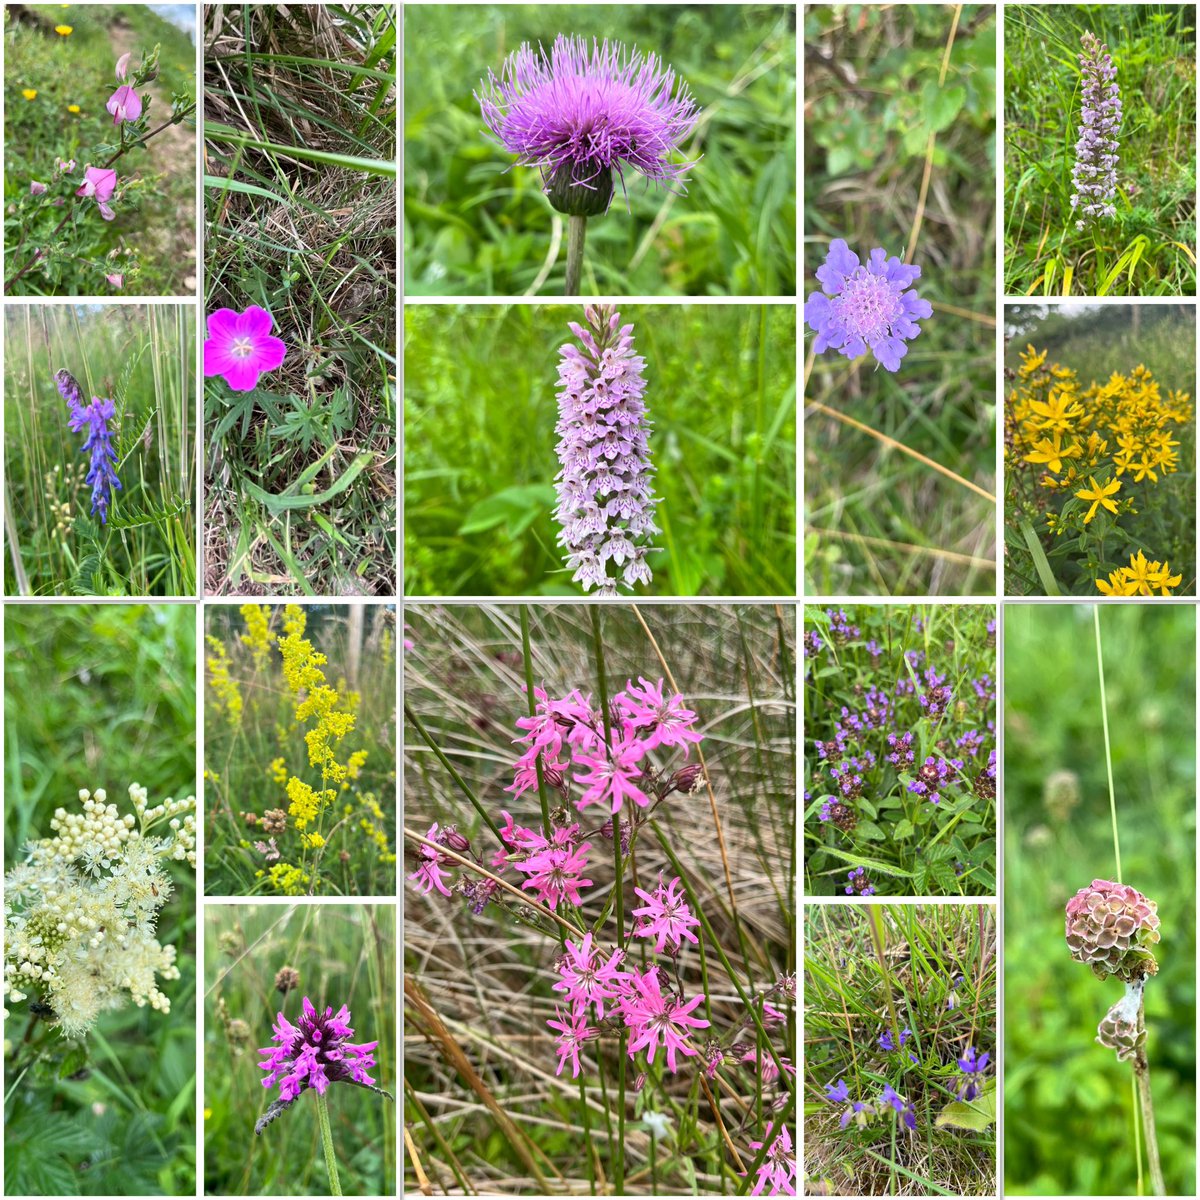 Lousewort, tufted vetch, bloody cranesbill, melancholy thistle, common spotted orchid, small scabious, chalk ? fragrant orchid, St John’s wort, meadowsweet, lady’s bedstraw, ragged robin, self heal, milkwort, salad burnet @bsbi @wildflower_hour #wildflowerhour @ukorchids